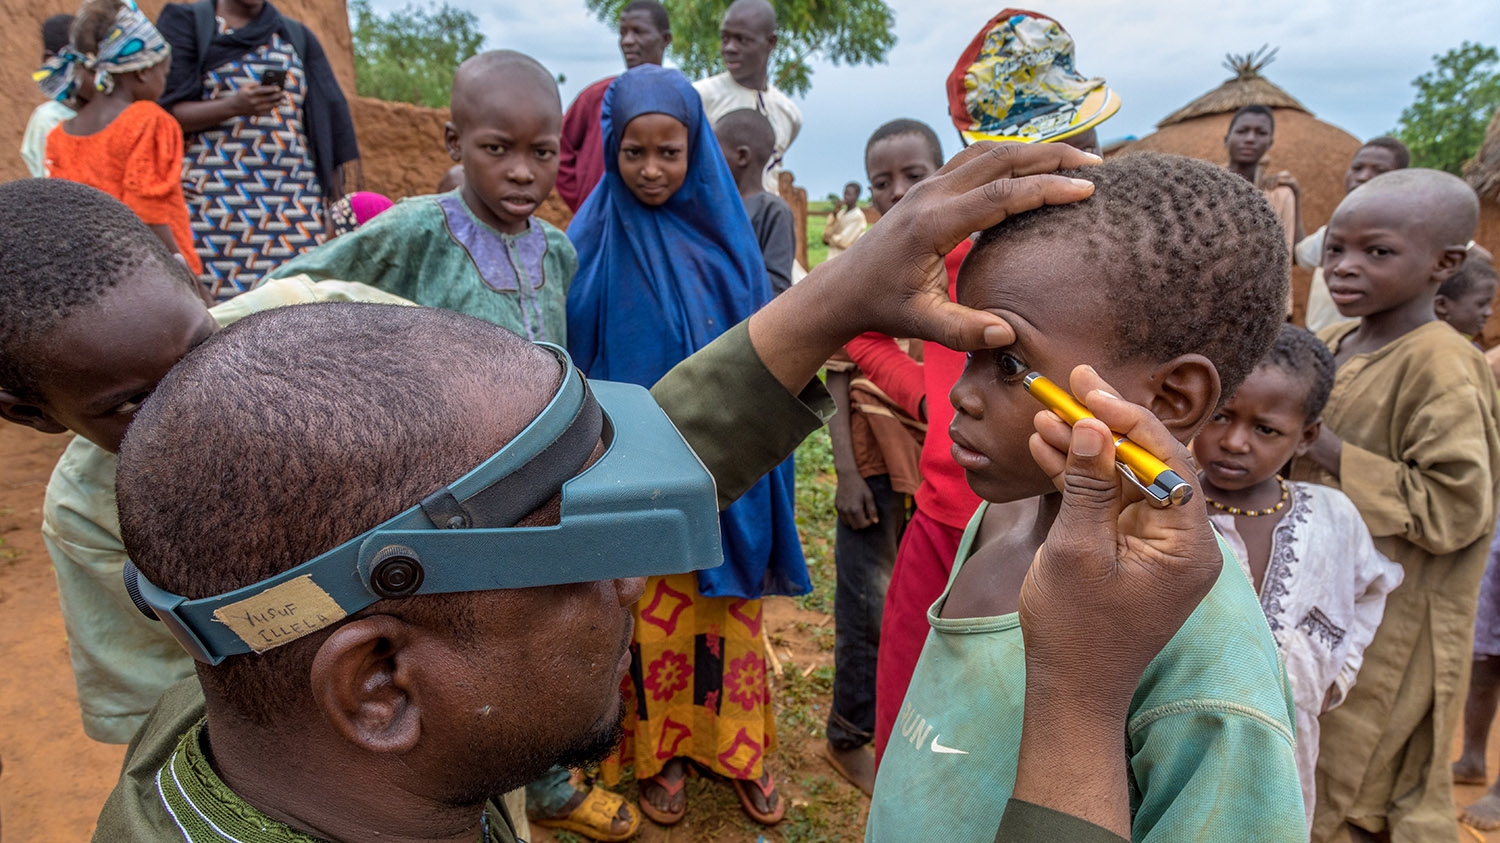 An eye health worker screens a young child for trachoma during a community screening in Sokoto, Nigeria.